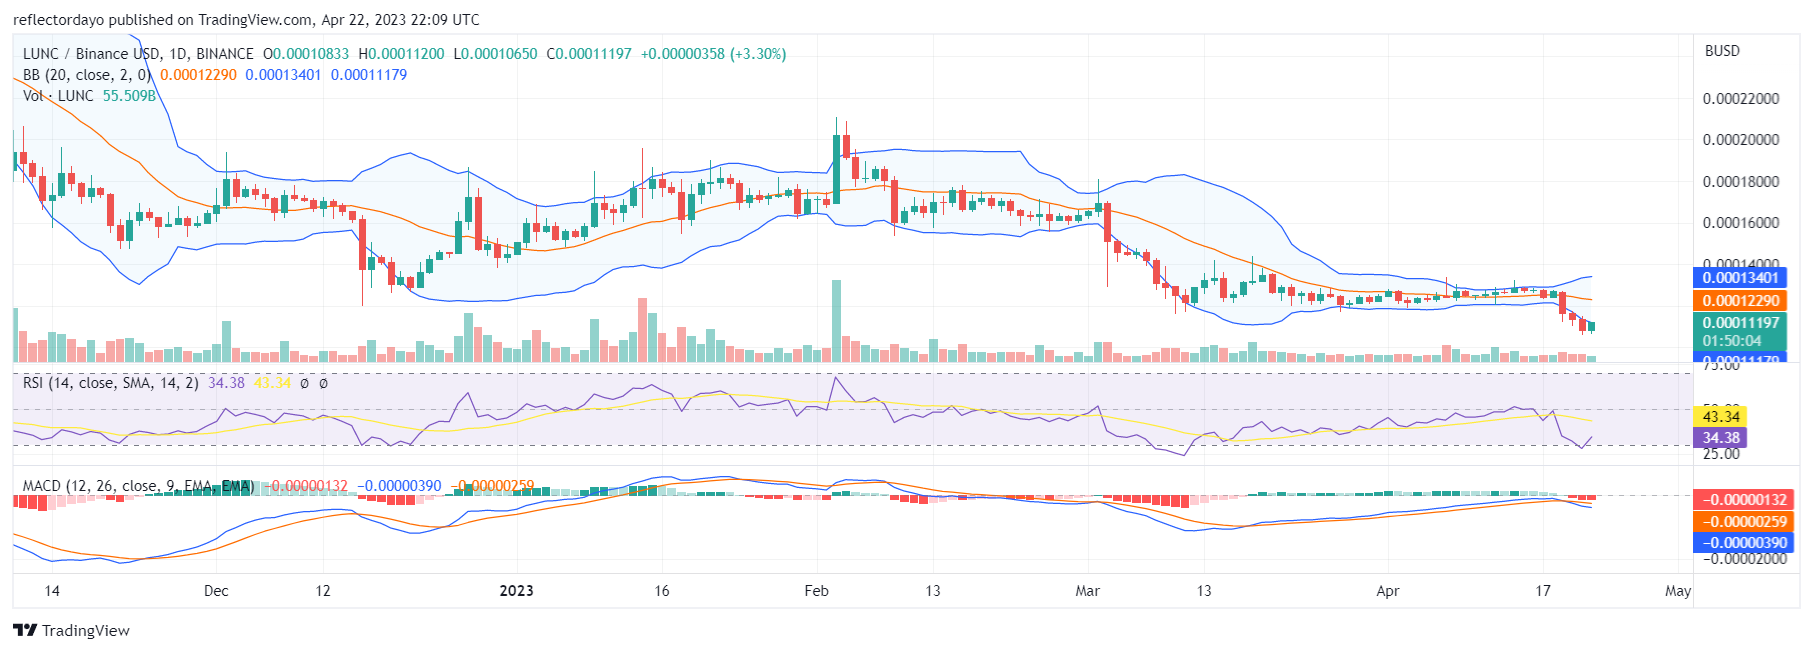 Top Trending Coins for Today, April 15: ARB, BTC, SHIB, ID, and LUNC